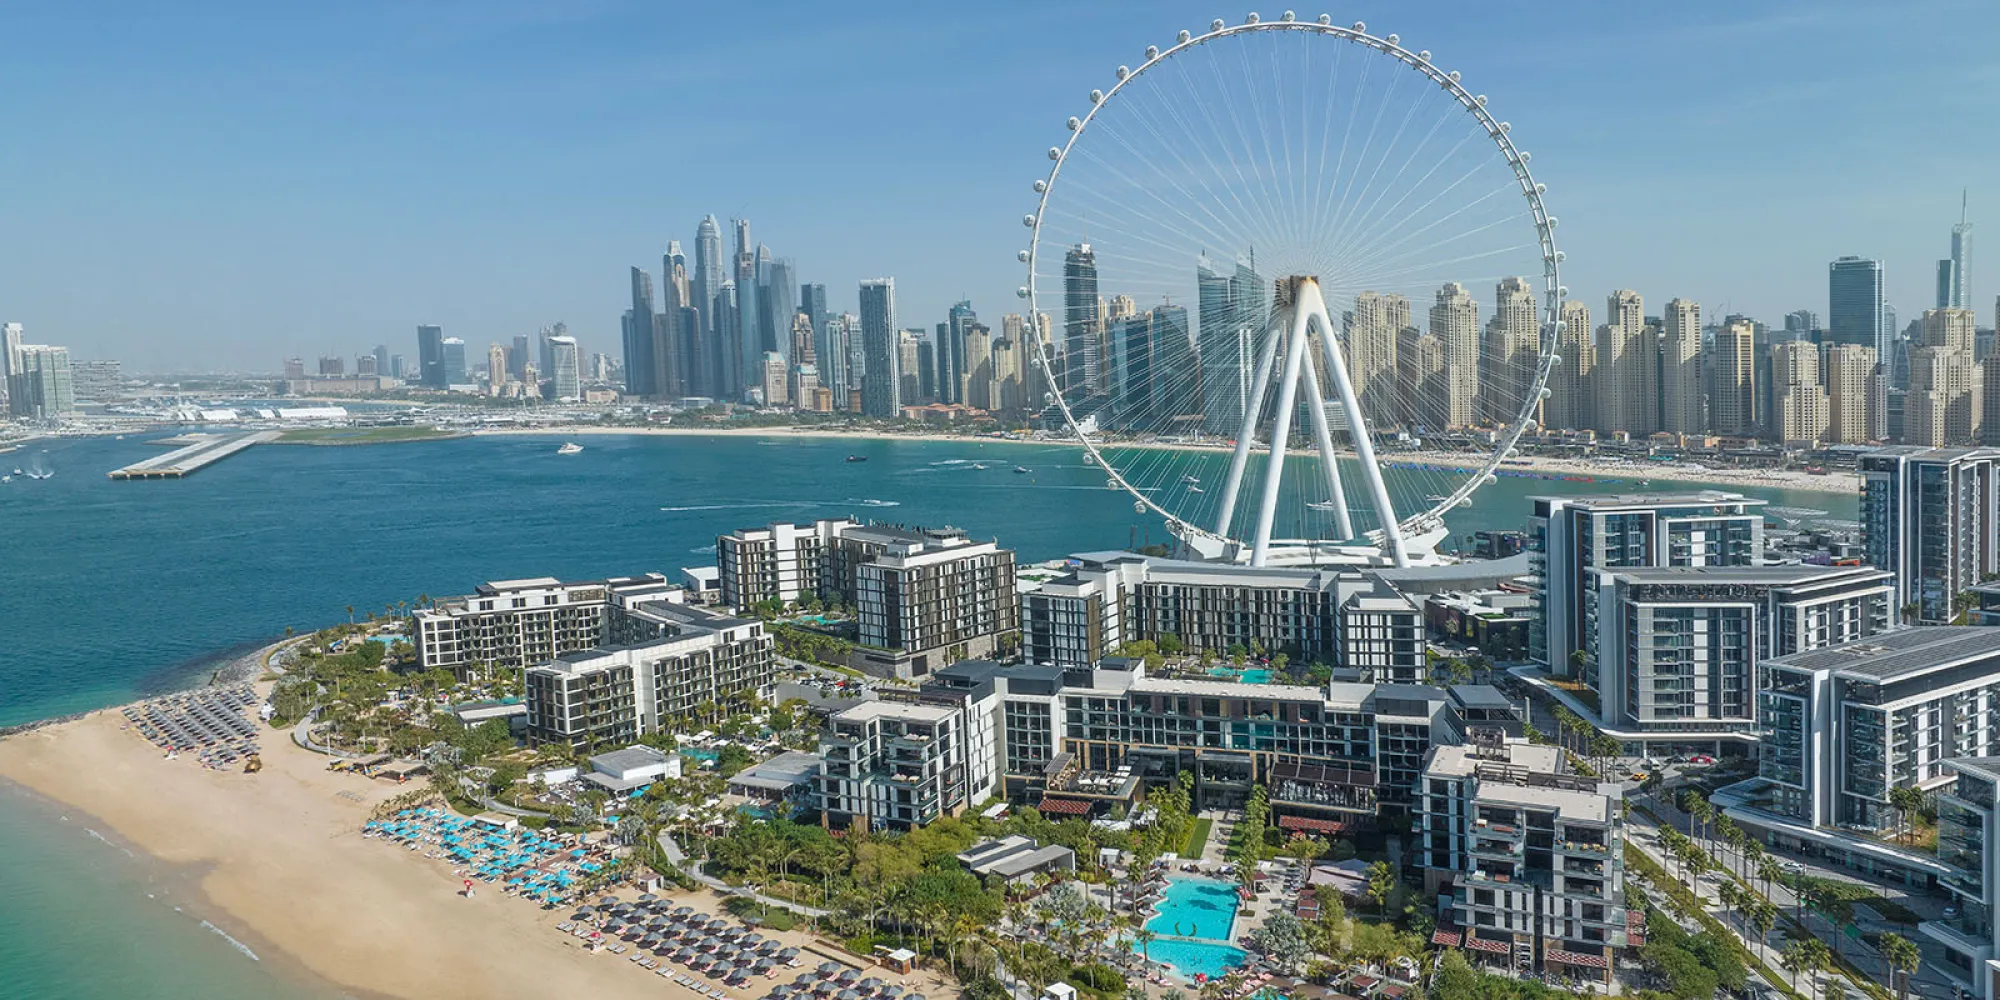 Bluewaters Island, the government-owned development housing the new Banyan Tree Dubai